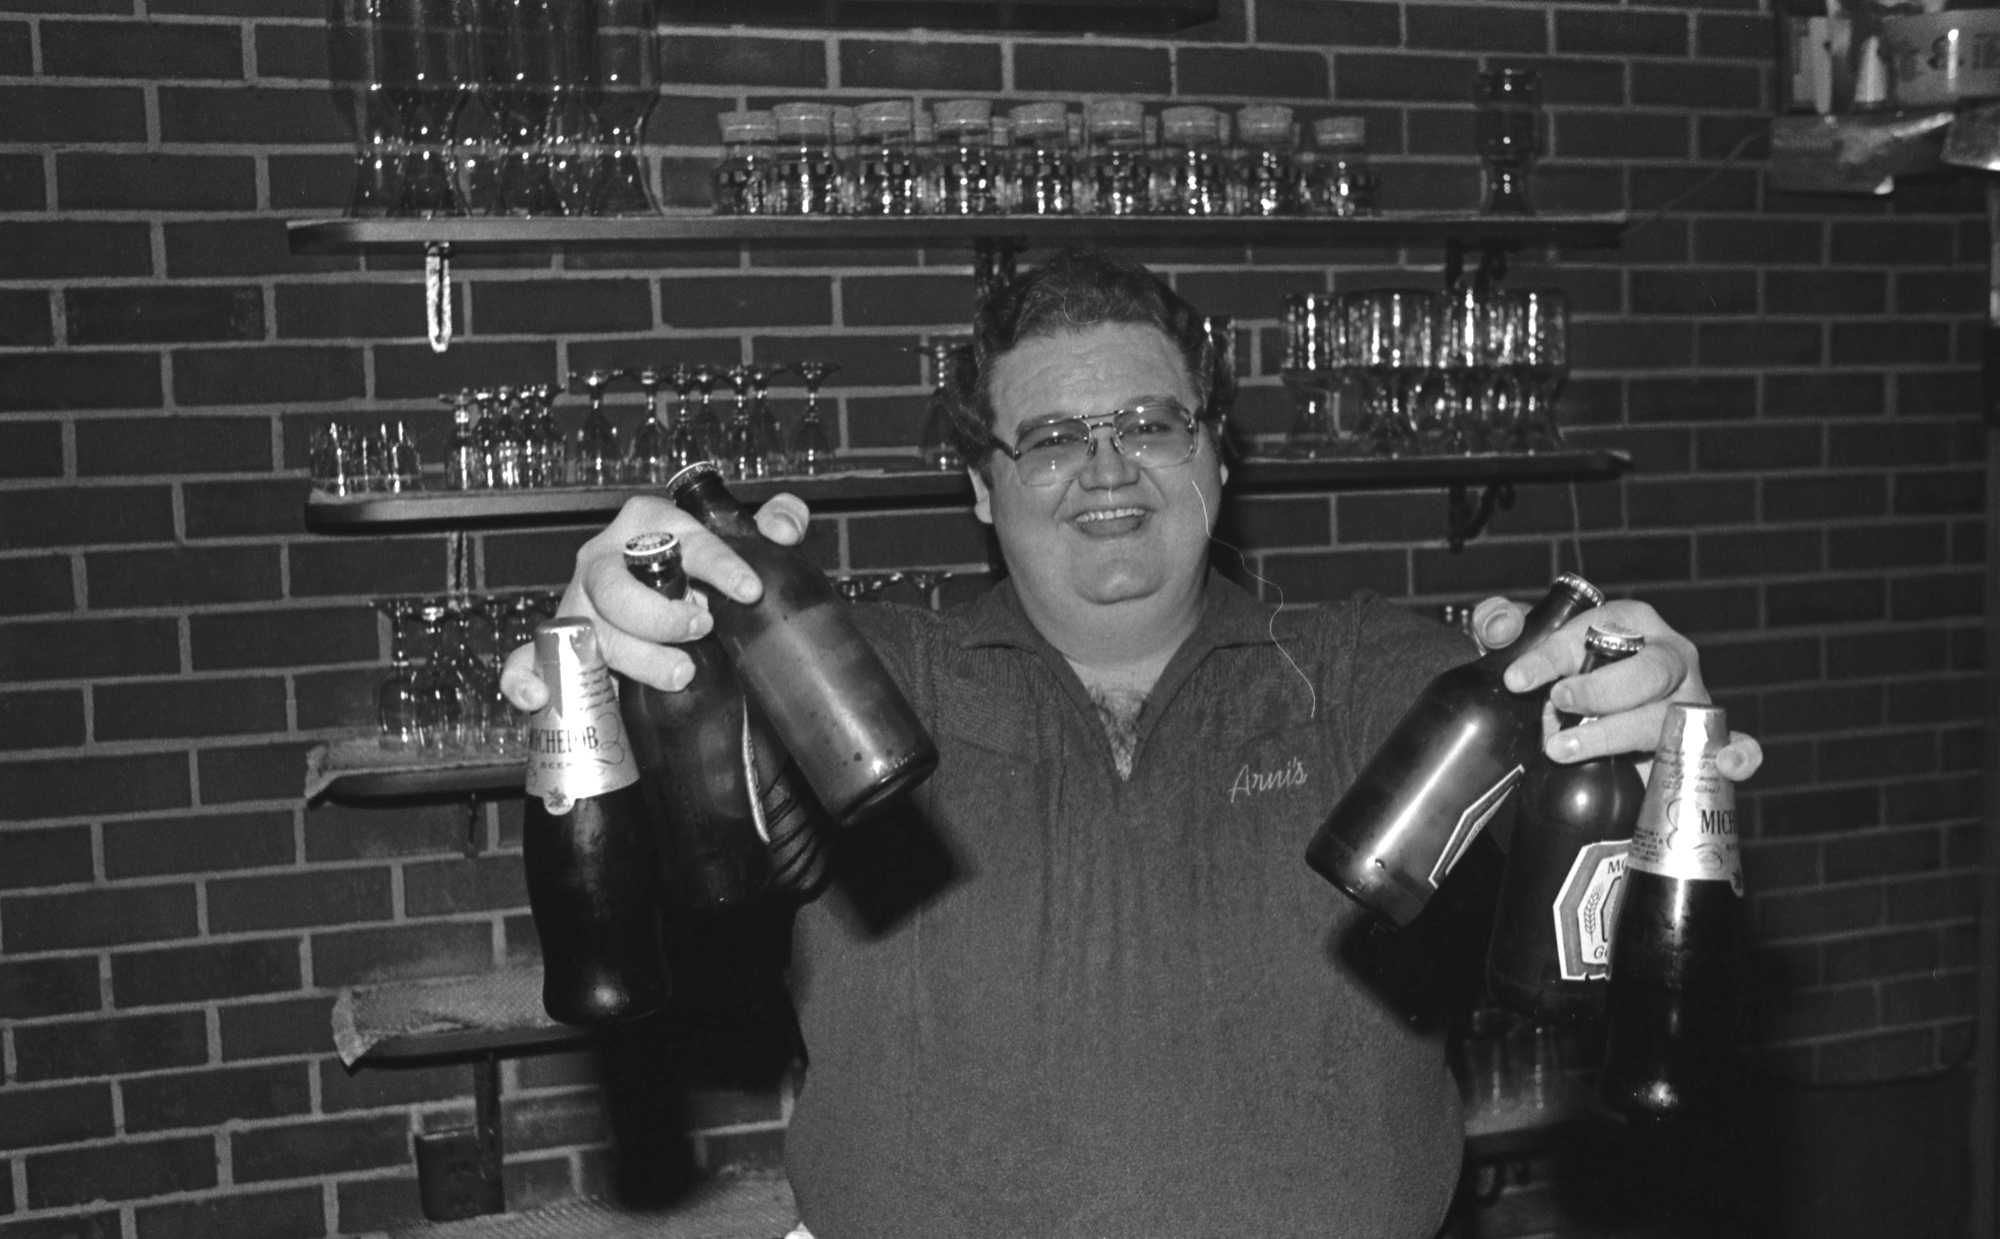 Joe Bailey, a popular bartender and manager at Arni's for over 30 years,